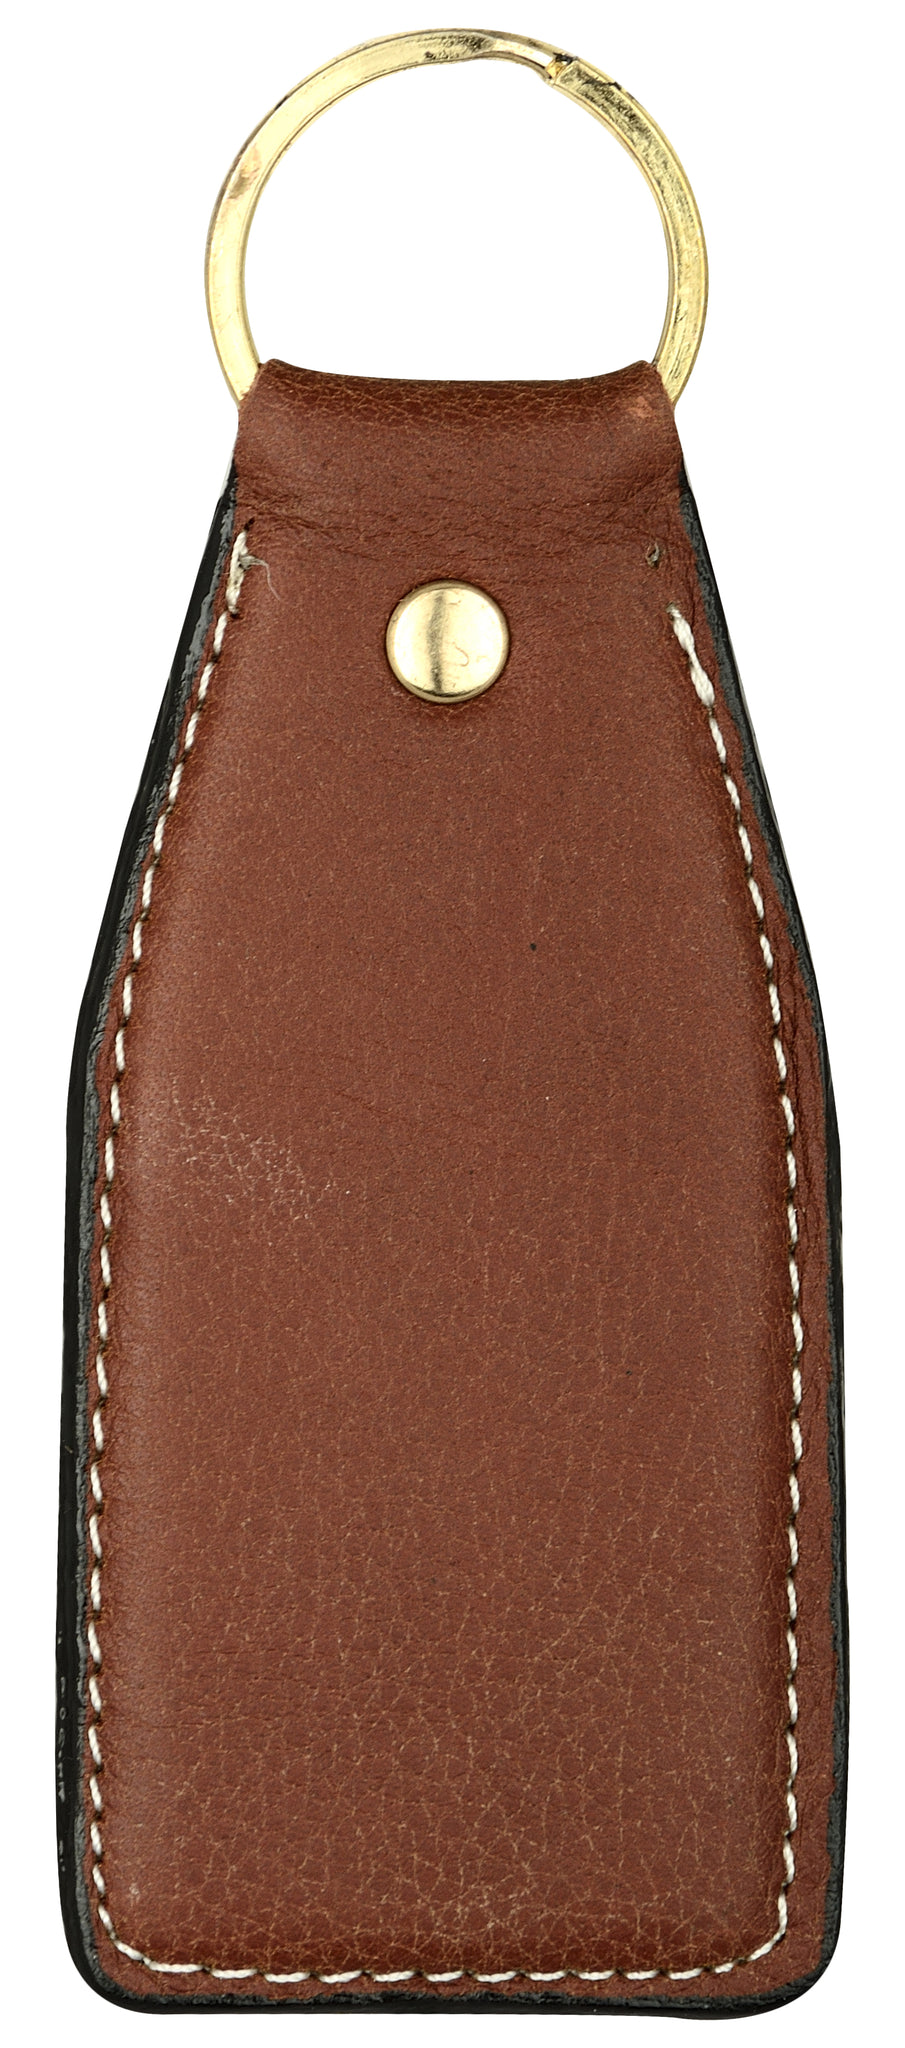 dark brown curved leather key chain